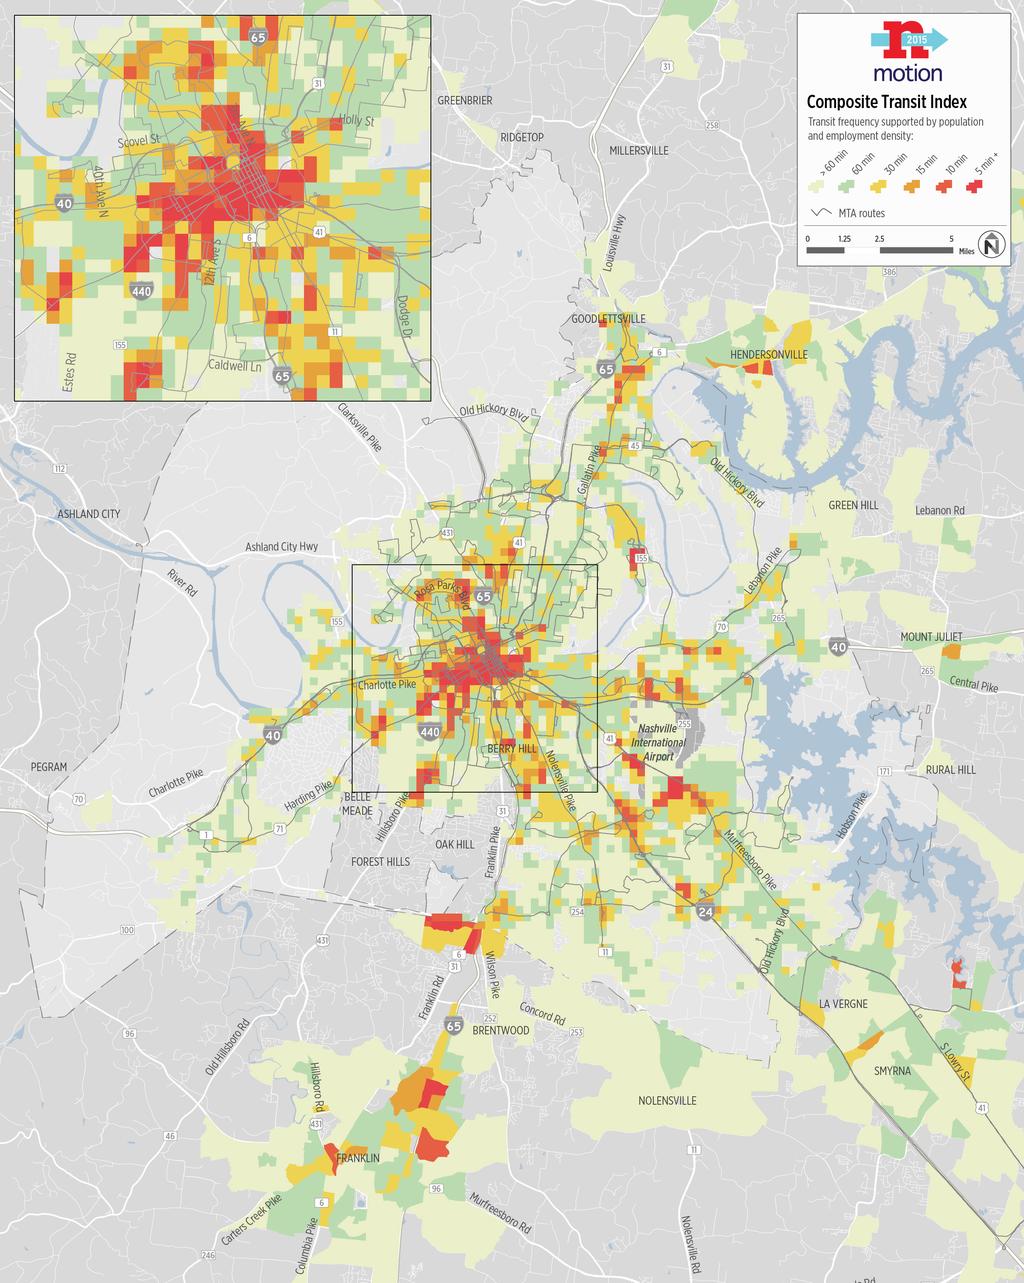 Looking forward to 2040, and with expected changes to development patterns as a result of NashvilleNext, most new growth in Davidson County will occur within Nashville MTA s existing service area